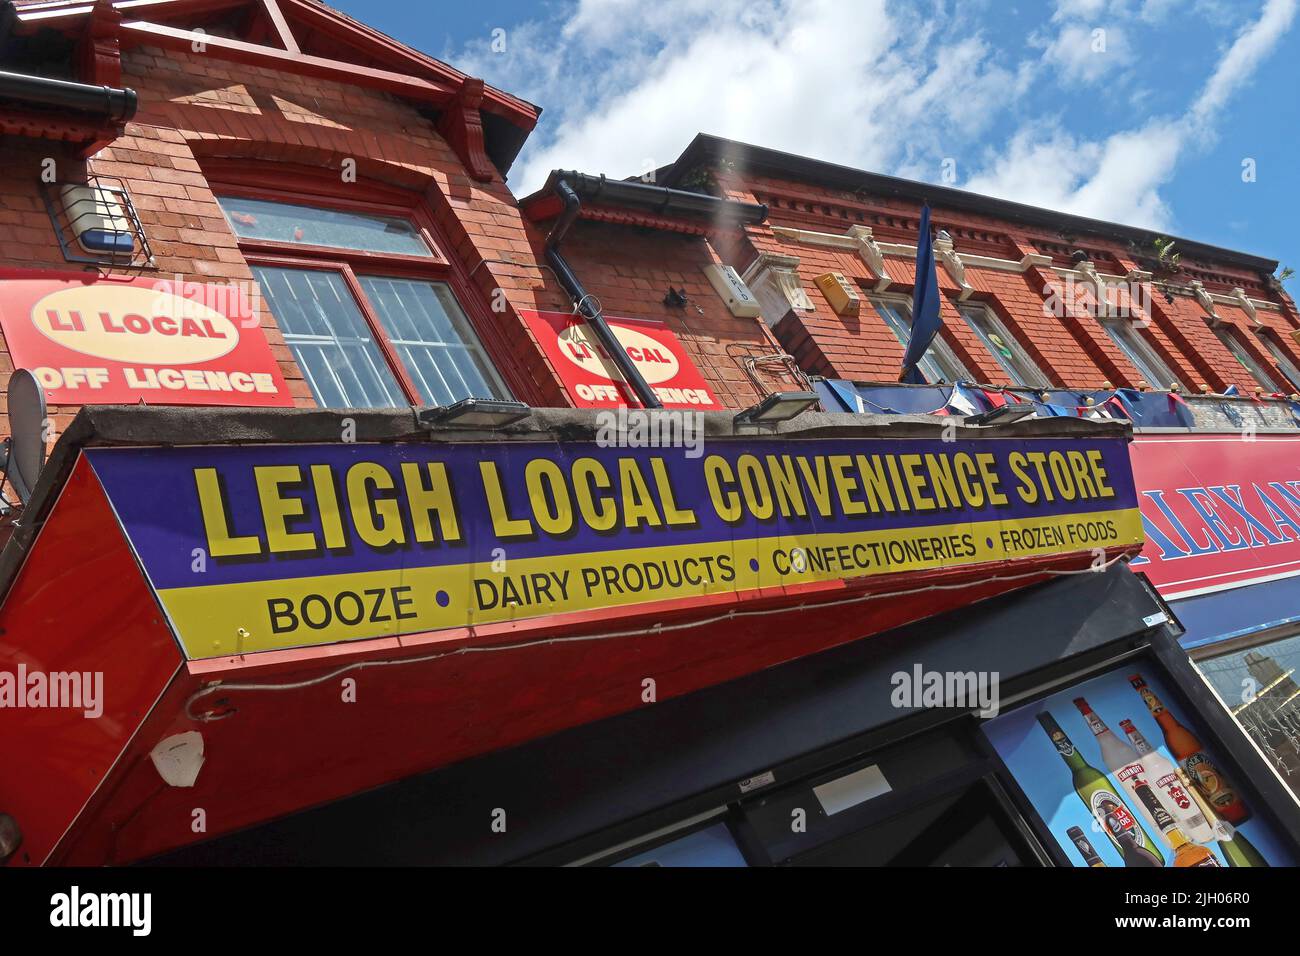 LI Local,  Leigh Local Convenience store, Booze, Diary Products, Confectioneries, Frozen Foods, 20 Railway Rd, Leigh, England,UK, WN7 4AX Stock Photo